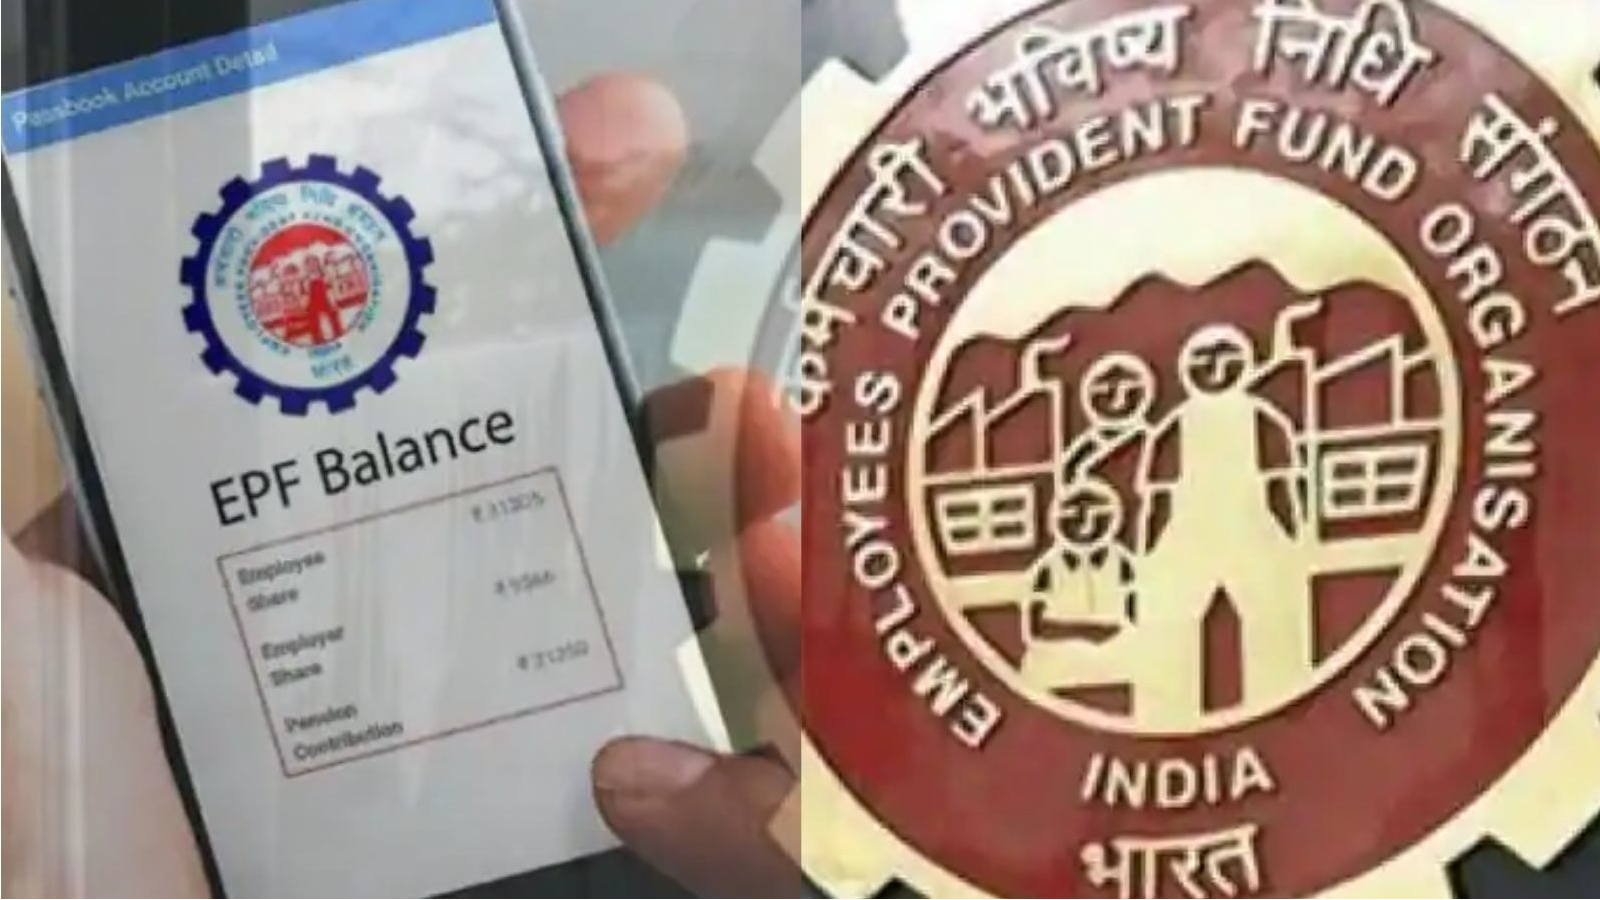 PF interest Update : EPFO will credit 8.1 percent interest 2022 to PF accounts, check your pf balance - Rightsofemployees.com